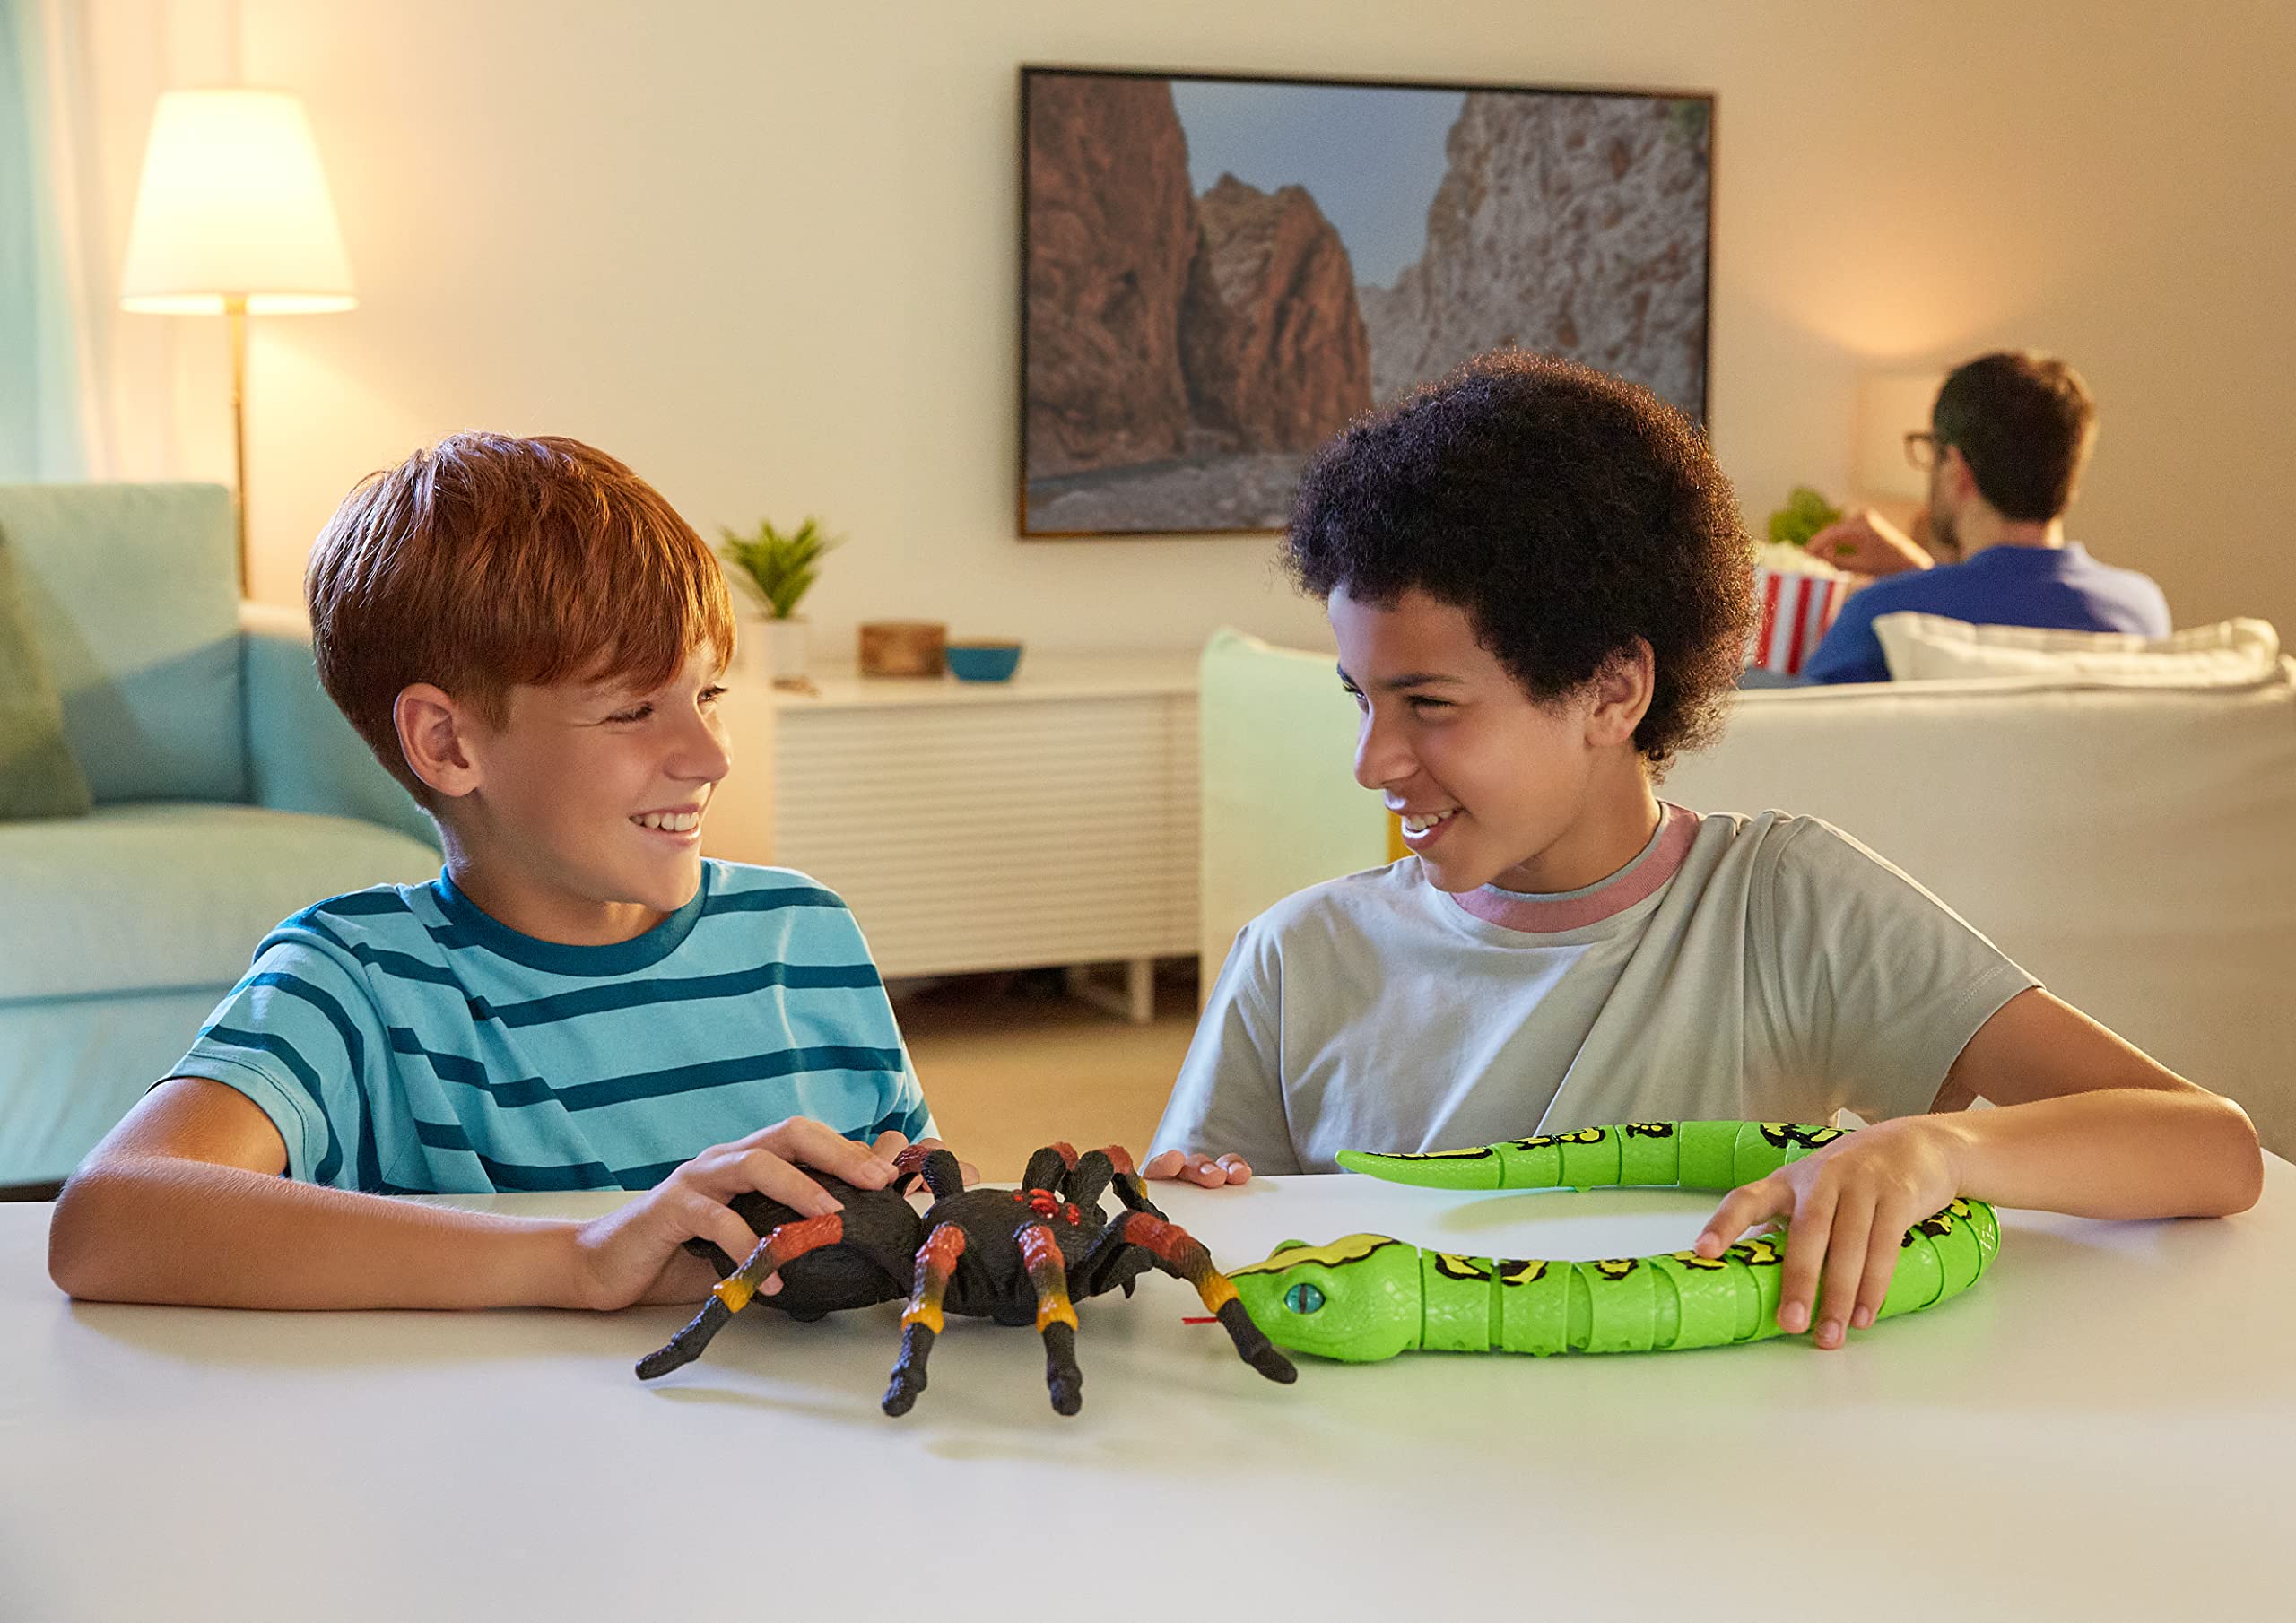 Robo Alive Giant Tarantula by ZURU Battery-Powered Robotic Interactive Electronic Spider That Moves and Crawls, Comes with Web Slime, Prankst Toys for Boys, Kids, Teens